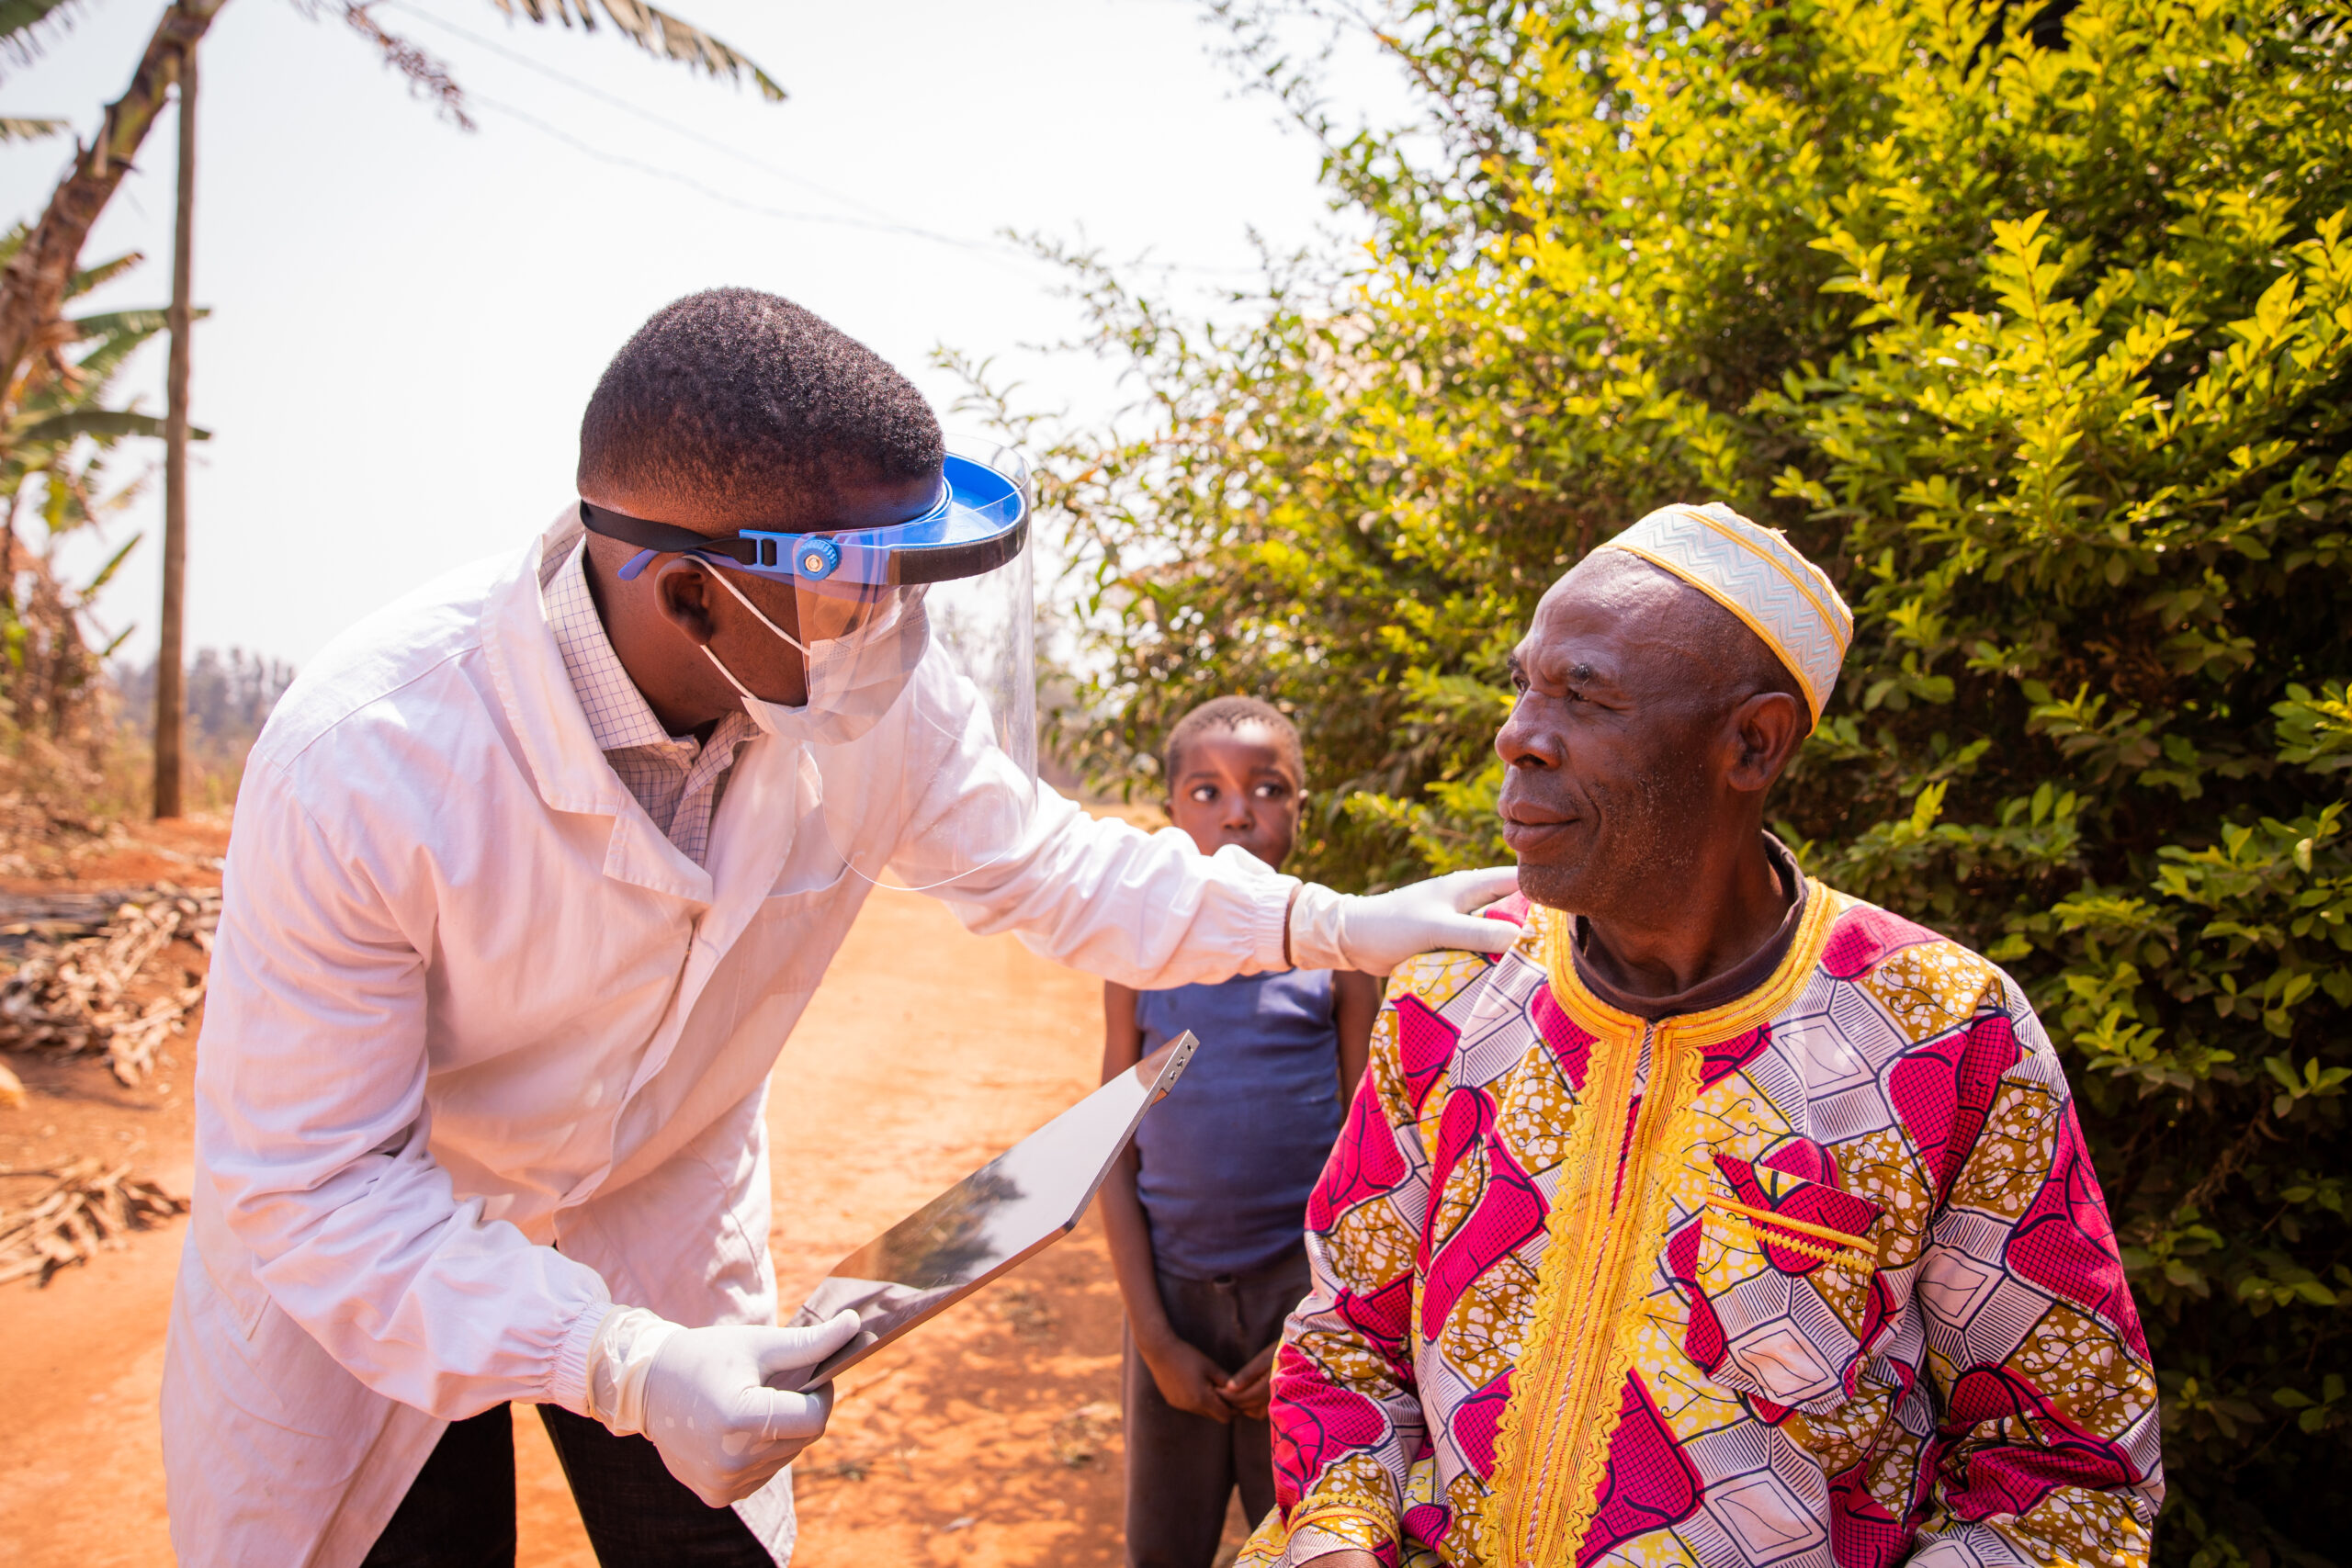 African doctor visits an elderly patient and they converse during the medical examination.